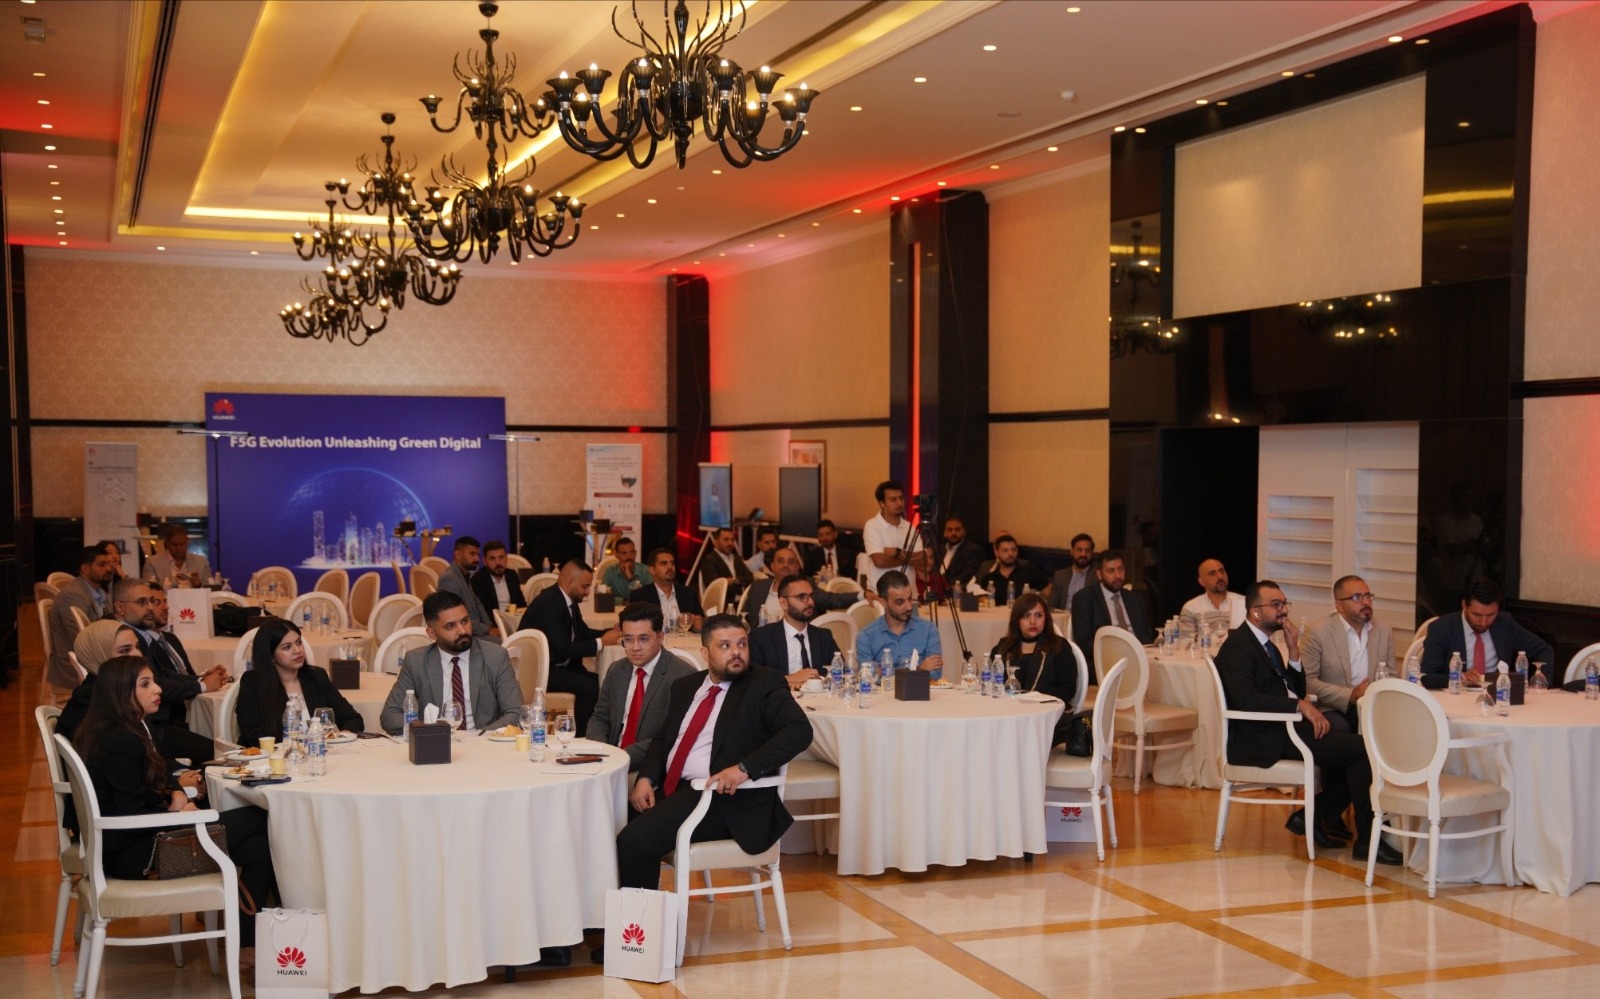 •	Summit brought together ISP industry leaders to exchange information on industry trends and unveil leading technologies and solutions to empower the optical industry’s digital transformation

Baghdad, Iraq, Oct 29, 2023 – Huawei, a leading provider of information and communications technology (ICT) infrastructure and smart devices, together with strategic partner Mindware, successfully hosted the ISP Summit 2023 in Baghdad, Iraq. The event brought together industry leaders to address the increasing demand for broadband services and explored opportunities to accelerate the deployment of all-optical Internet and next-generation networks.

Under the theme of "F5G Evolution Unleashing Green Digital" the Summit served as a platform for industry leaders in the Internet Service Provider (ISP) sector to exchange information on all-optical networks trends and showcase leading technologies and solutions in the optical field aiming to create a smarter and more resilient Internet infrastructure. The event witnessed the participation of prominent players from executives to technical experts in the ISP industry. 
 
Philippe Jarre, President of Mindware Group, said, "We are excited to partner with Huawei to provide advanced solutions to ISPs, as Iraq enters an era of rapid growth. By bringing the industry together for the Summit, we were able to demonstrate how Huawei's optical solutions can accelerate Iraq's digital transformation while having the opportunity to meet with our key partners and address the challenges they face in their network transformation journeys."     

James Zhang, Managing Director of Huawei Iraq Enterprise Business Group, said, "We are in an era of unprecedented growth where networks are struggling to manage the immense demand for services. Our optical solutions have the capability to overcome these challenges and help usher in the gigabit era. Our partnership with Mindware continues to deliver real value to Iraqi customers with differentiated customer service."             

Huawei showcased its optical innovations at the concurrent exhibition. These included the Huawei FTTR OptiXstar F30, the industry's first all-optical home network product based on the C-WAN architecture, which supports upstream transmission at 2000 Mbit/s. With six major upgrades in aesthetics, speed, rate, coverage, roaming, concurrency, and service, it provides ultra-gigabit Wi-Fi coverage and a high-quality digital home experience throughout the home.

In the ultra-broadband access field, Huawei showcased the industry's first commercial 50G PON solution to meet the increasing bandwidth demands of campuses, industrial interconnection, enterprises, and homes. The solution achieves a 25% increase in the optical power budget and supports existing ODN deployment without re-cabling. 

Iraq is undergoing massive expansion in network coverage. In 2022, ITPC, a telecom company under the Ministry of Communications of Iraq, leased the rights to operate optical networks in 15 provinces to 16 ISPs, aiming to increase the coverage of domestic access networks to 80% within three years. The ISP Summit 2023 marked another milestone in the cooperation between Huawei and Mindware, showcasing their commitment to creating a smarter internet infrastructure and driving the digital transformation in Iraq.